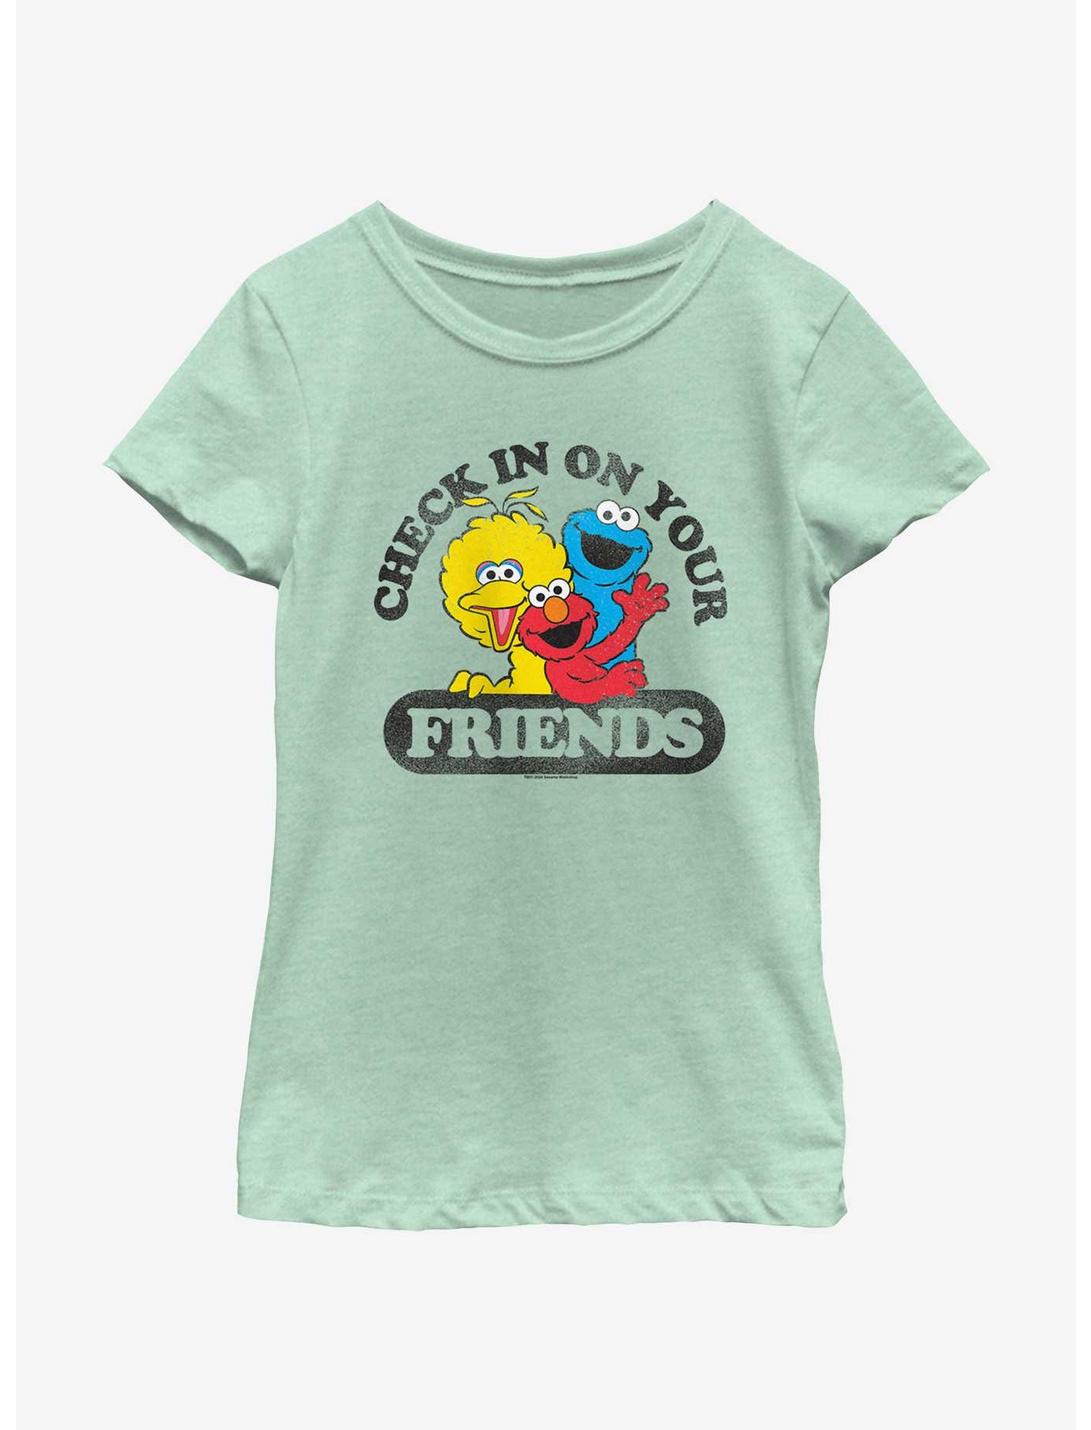 Sesame Street Check In On Your Friends Big Bird Cookie Monster and Elmo Youth Girls T-Shirt, MINT, hi-res